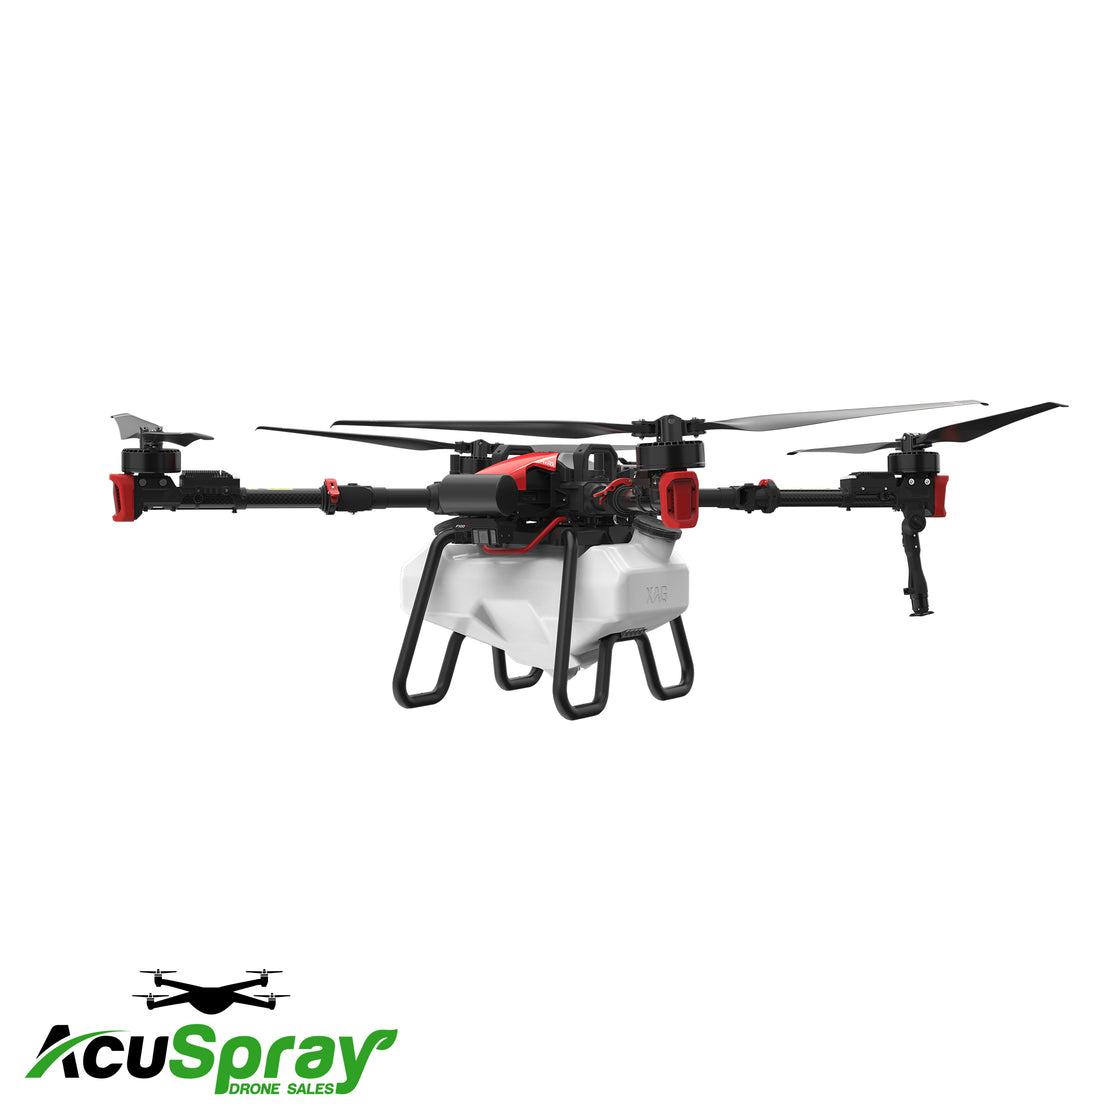 XAG P100 Pro Ready-To-Fly Kit: Your Ultimate Precision Agriculture Solution